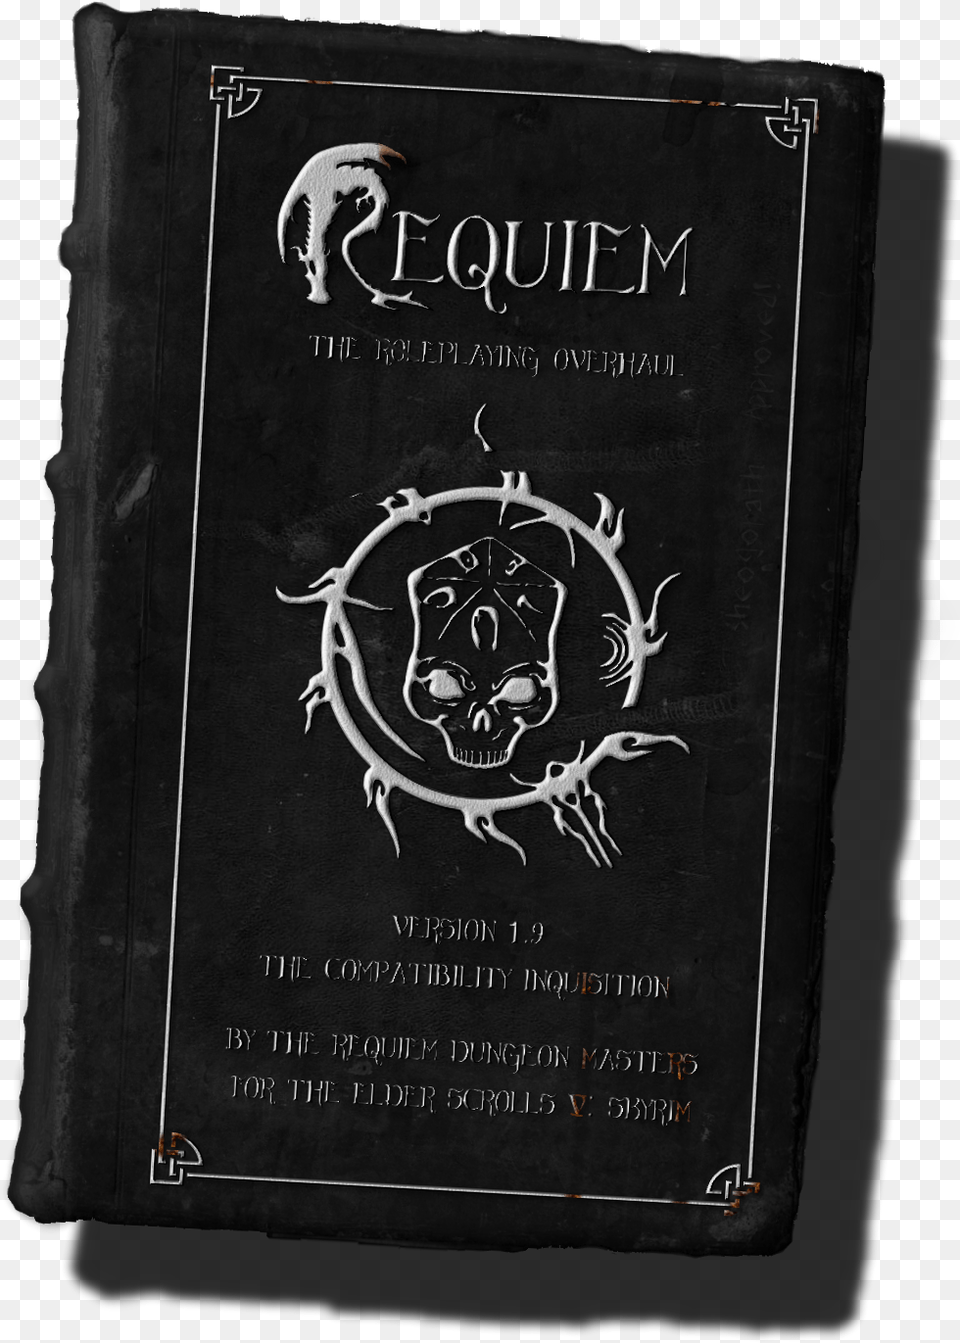 One Day In Skyrim Requiem Book Cover, Publication, Blackboard Png Image